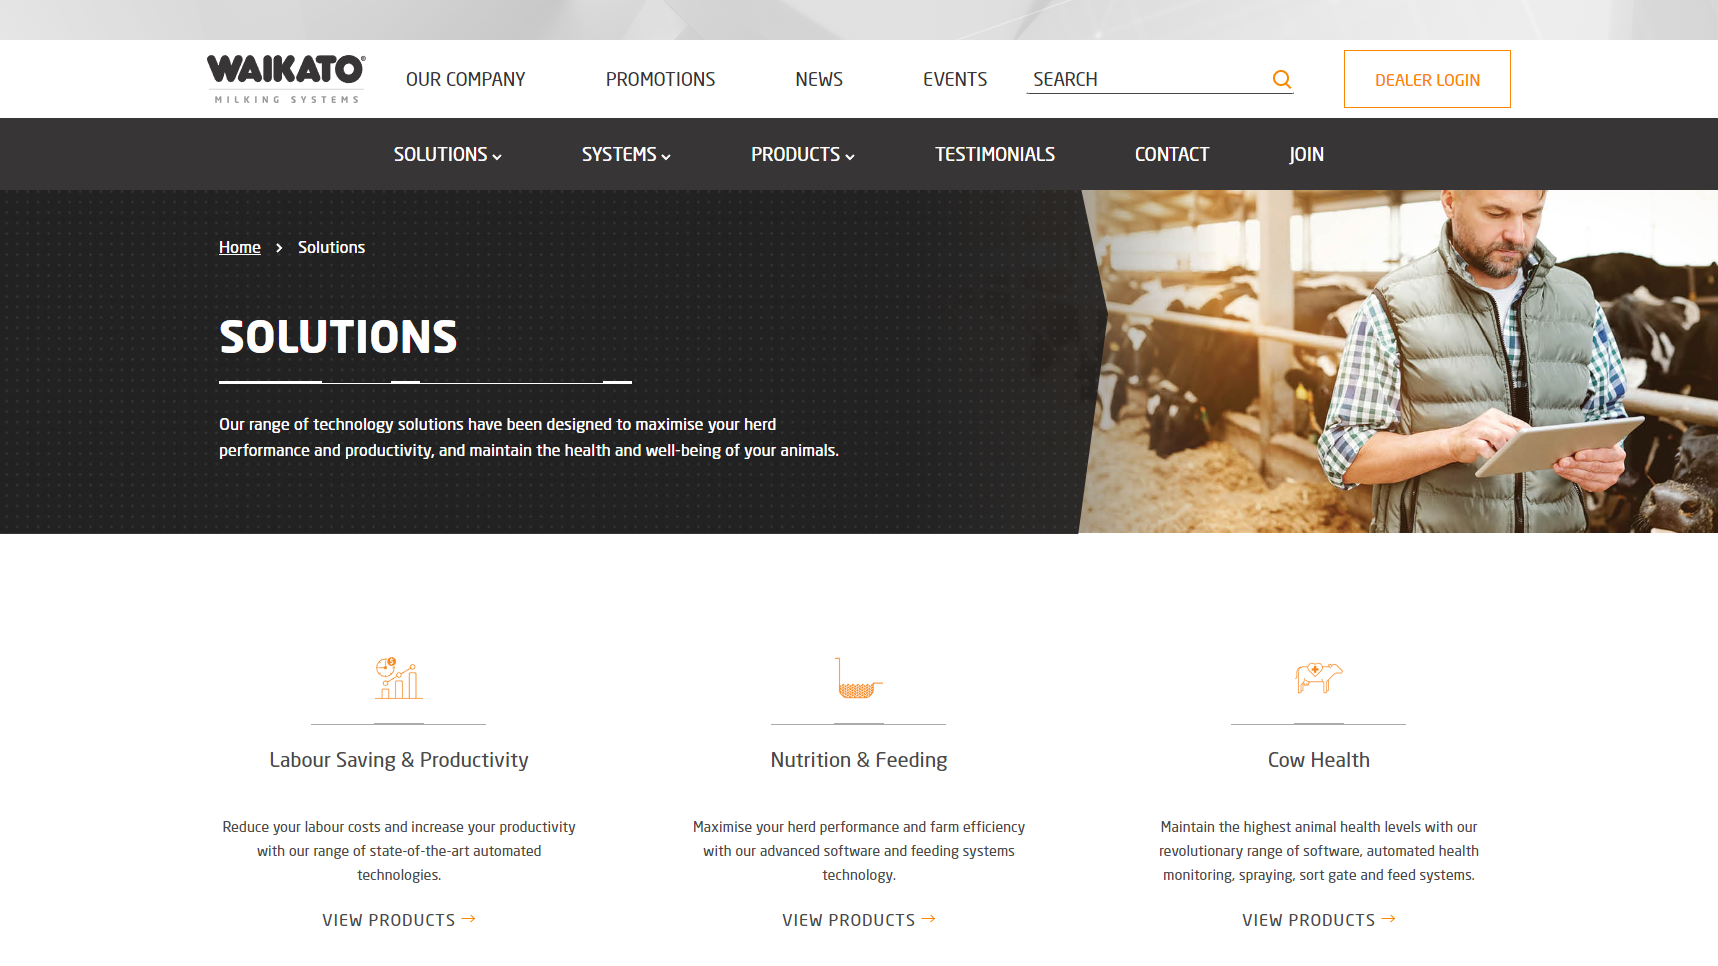 Waikato Milking Systems - Dairy Equipment Manufacturer